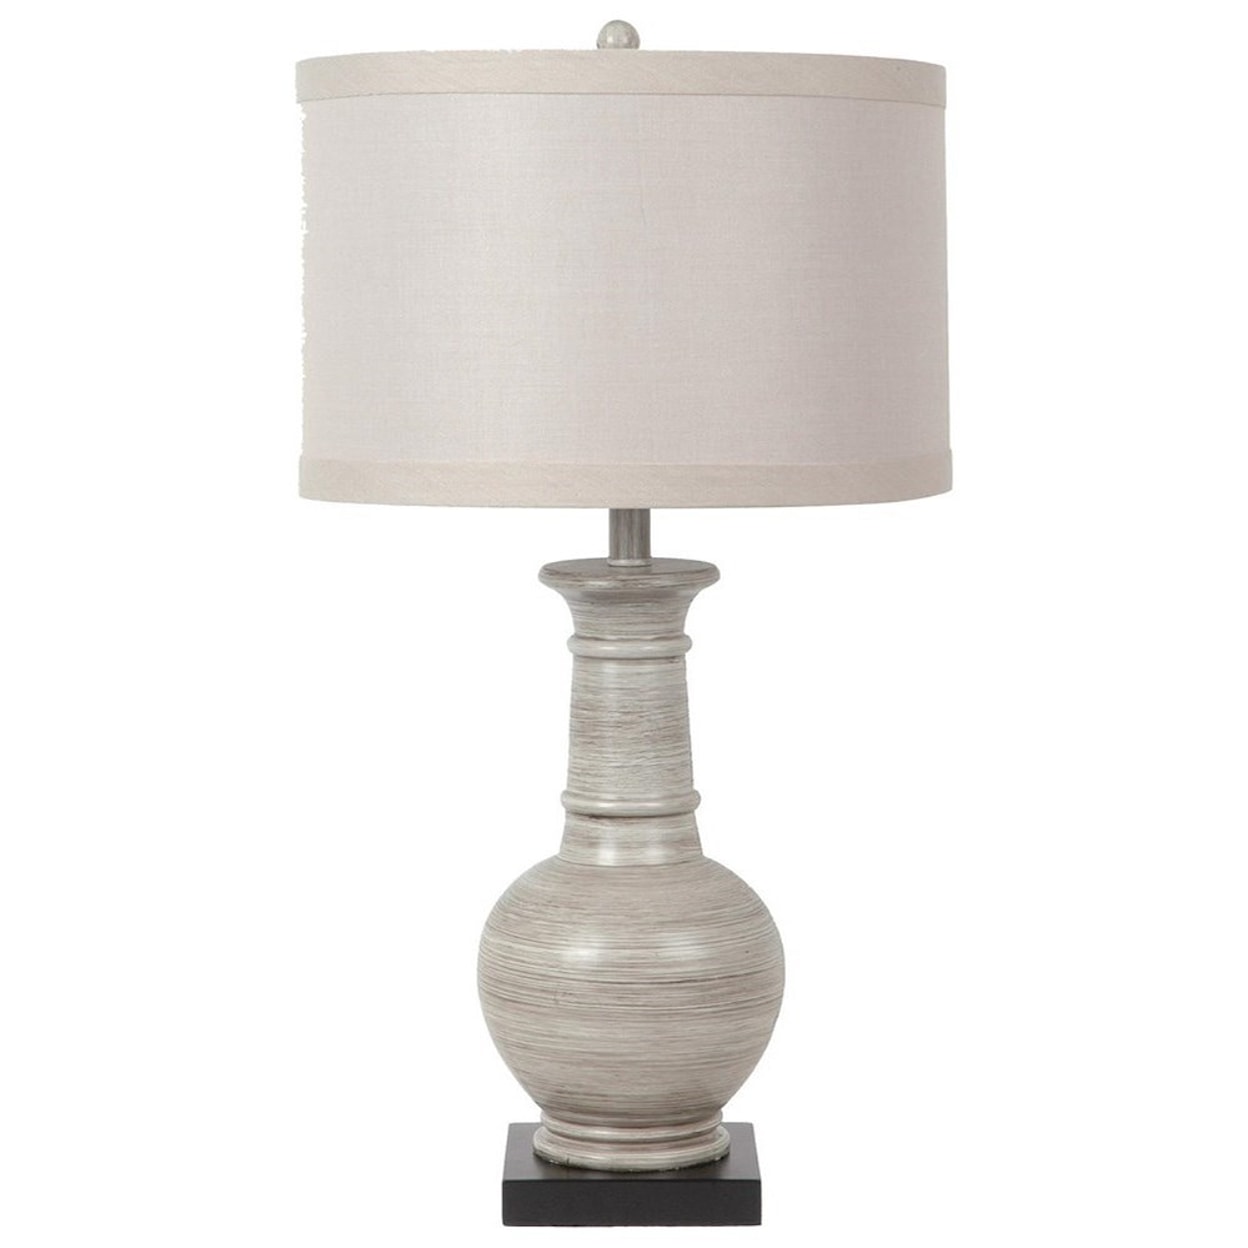 Crestview Collection Lighting Darby Table Lamp